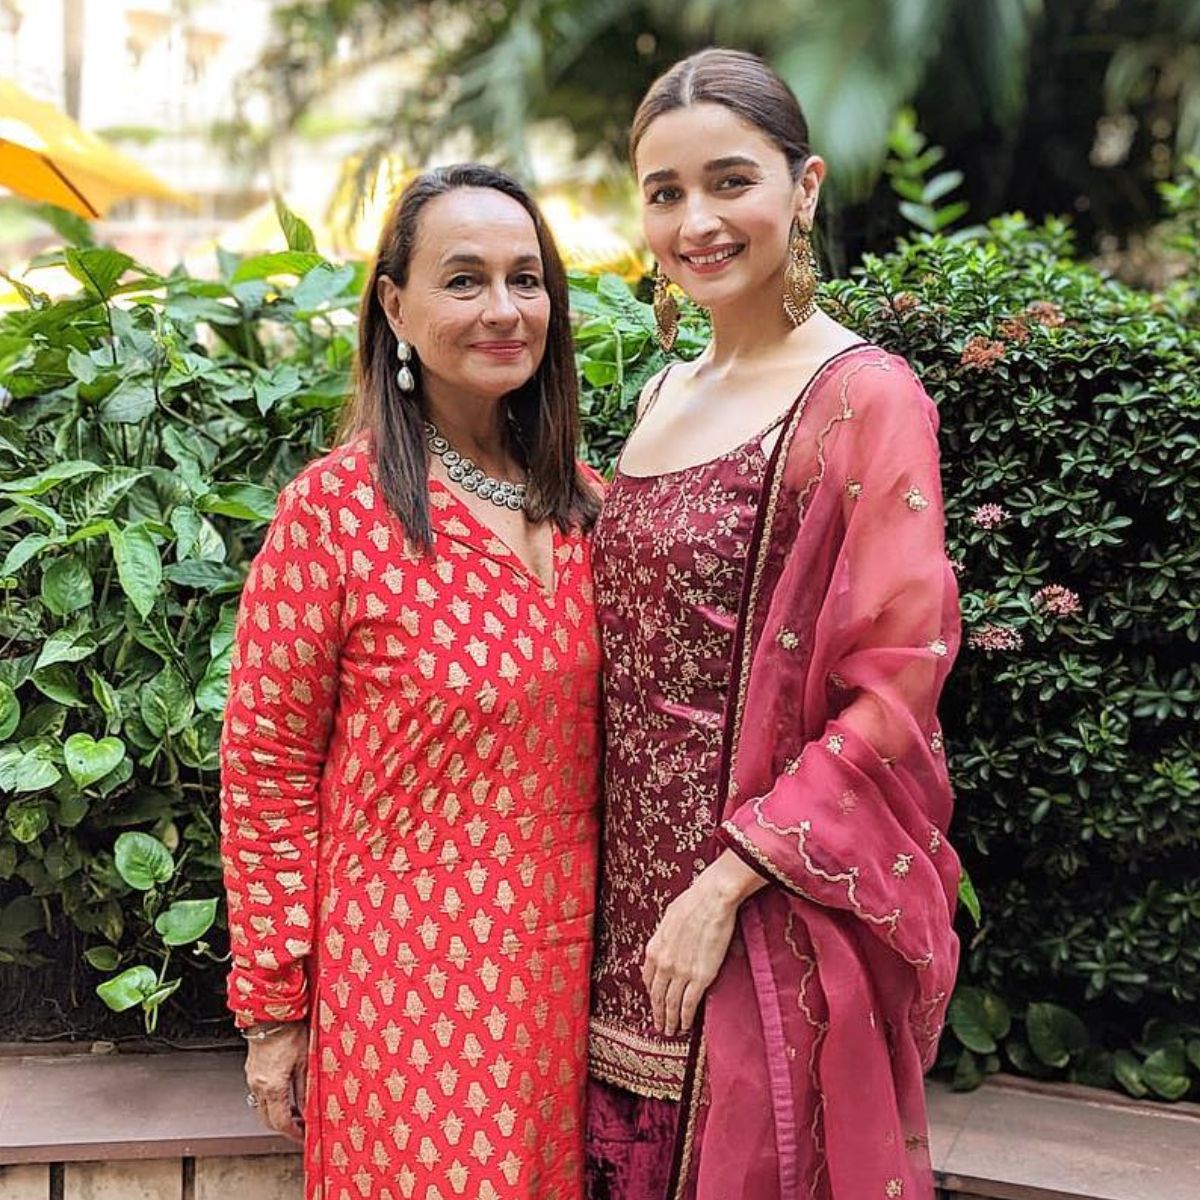 Alia's Mom Soni Razdan Says Those Speaking Against Nepotism Will Also Have Kids: What If They Want To Join The Industry?